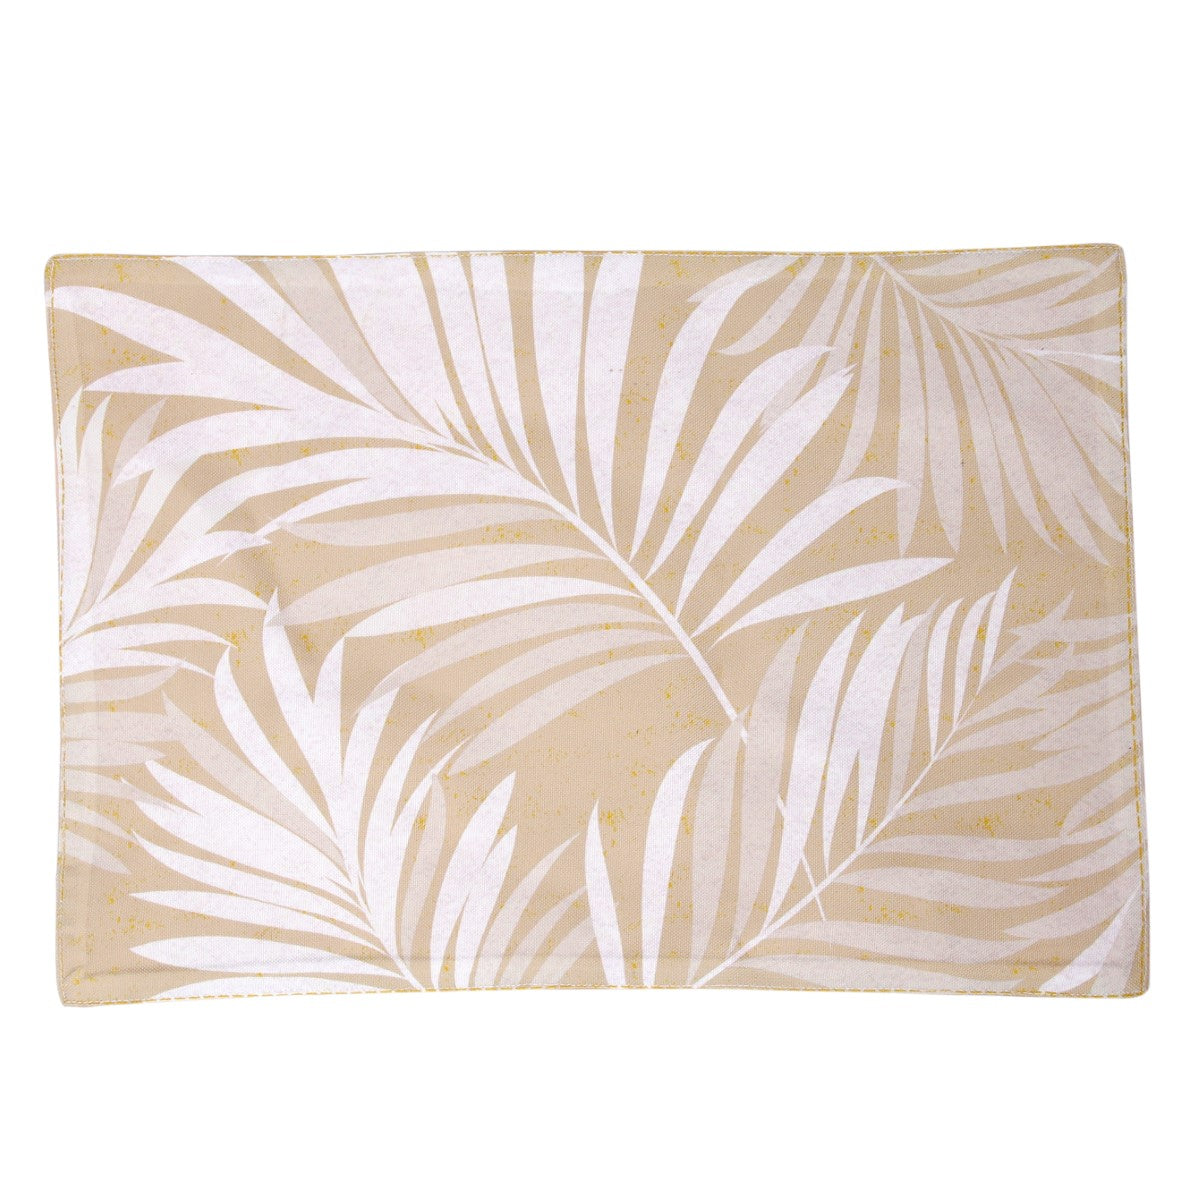 BUETRAL LEAVES PLACEMAT 13X19